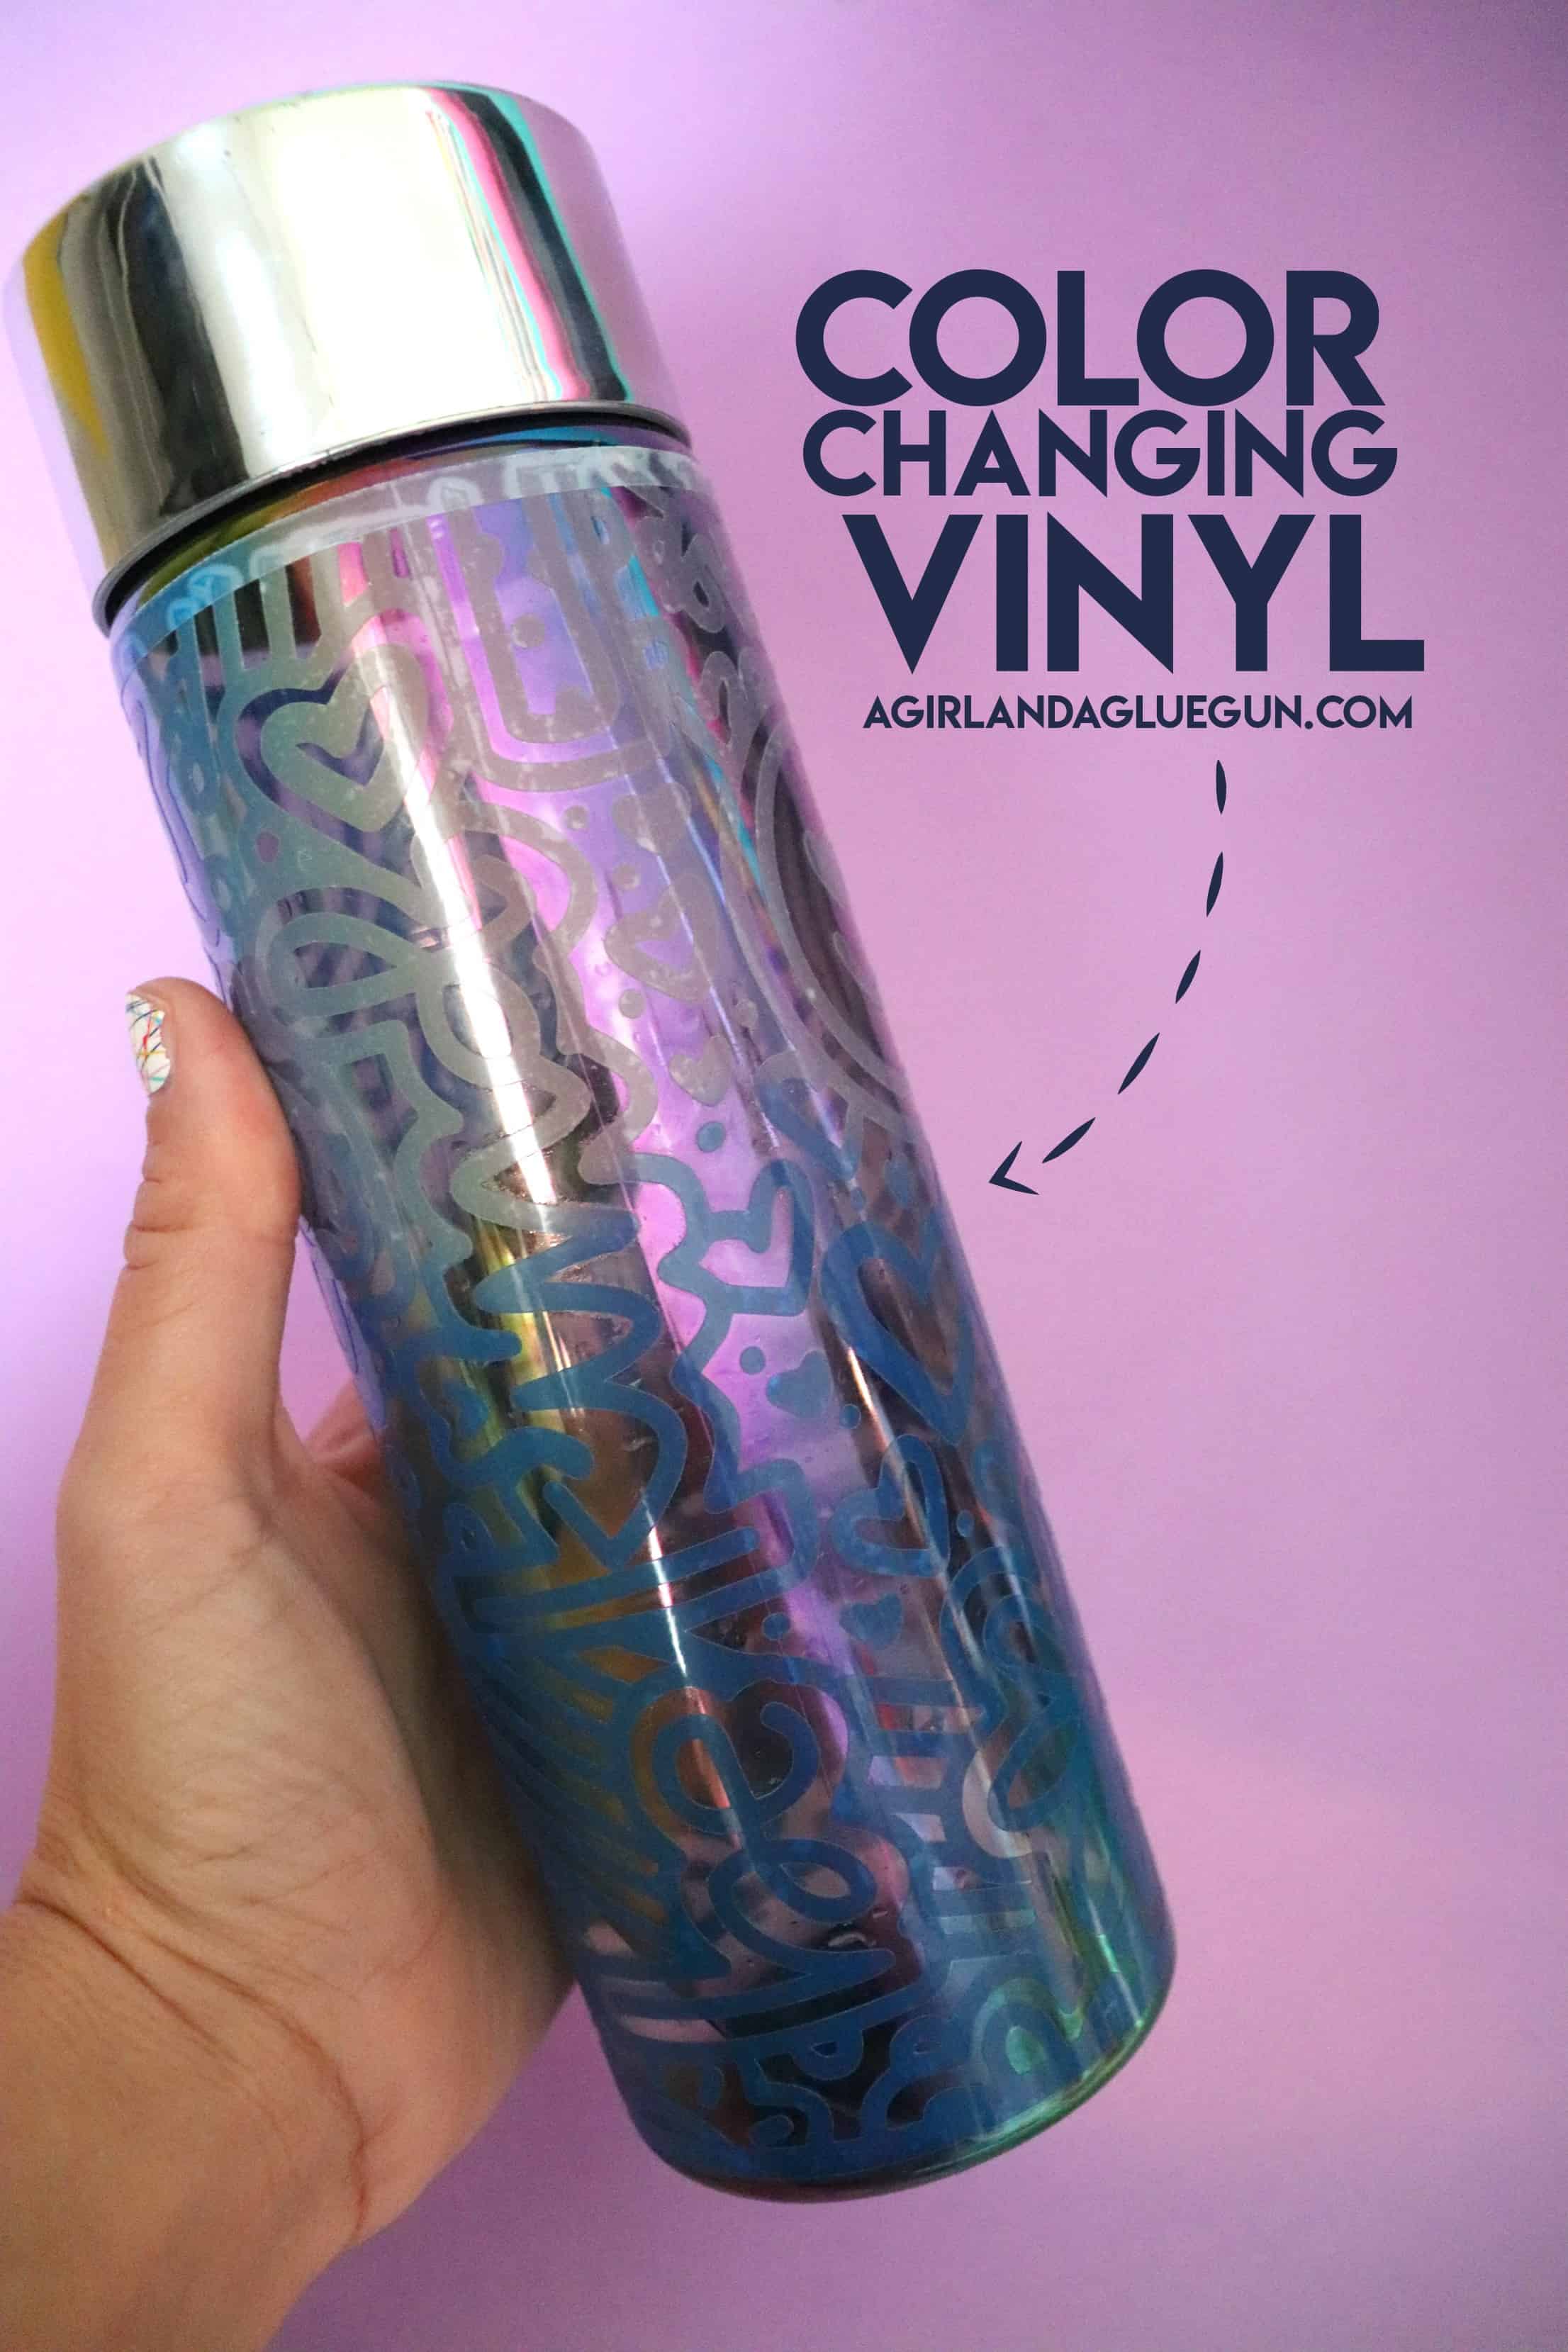 Awesome Color Changing Vinyl Ideas - Michelle James Designs